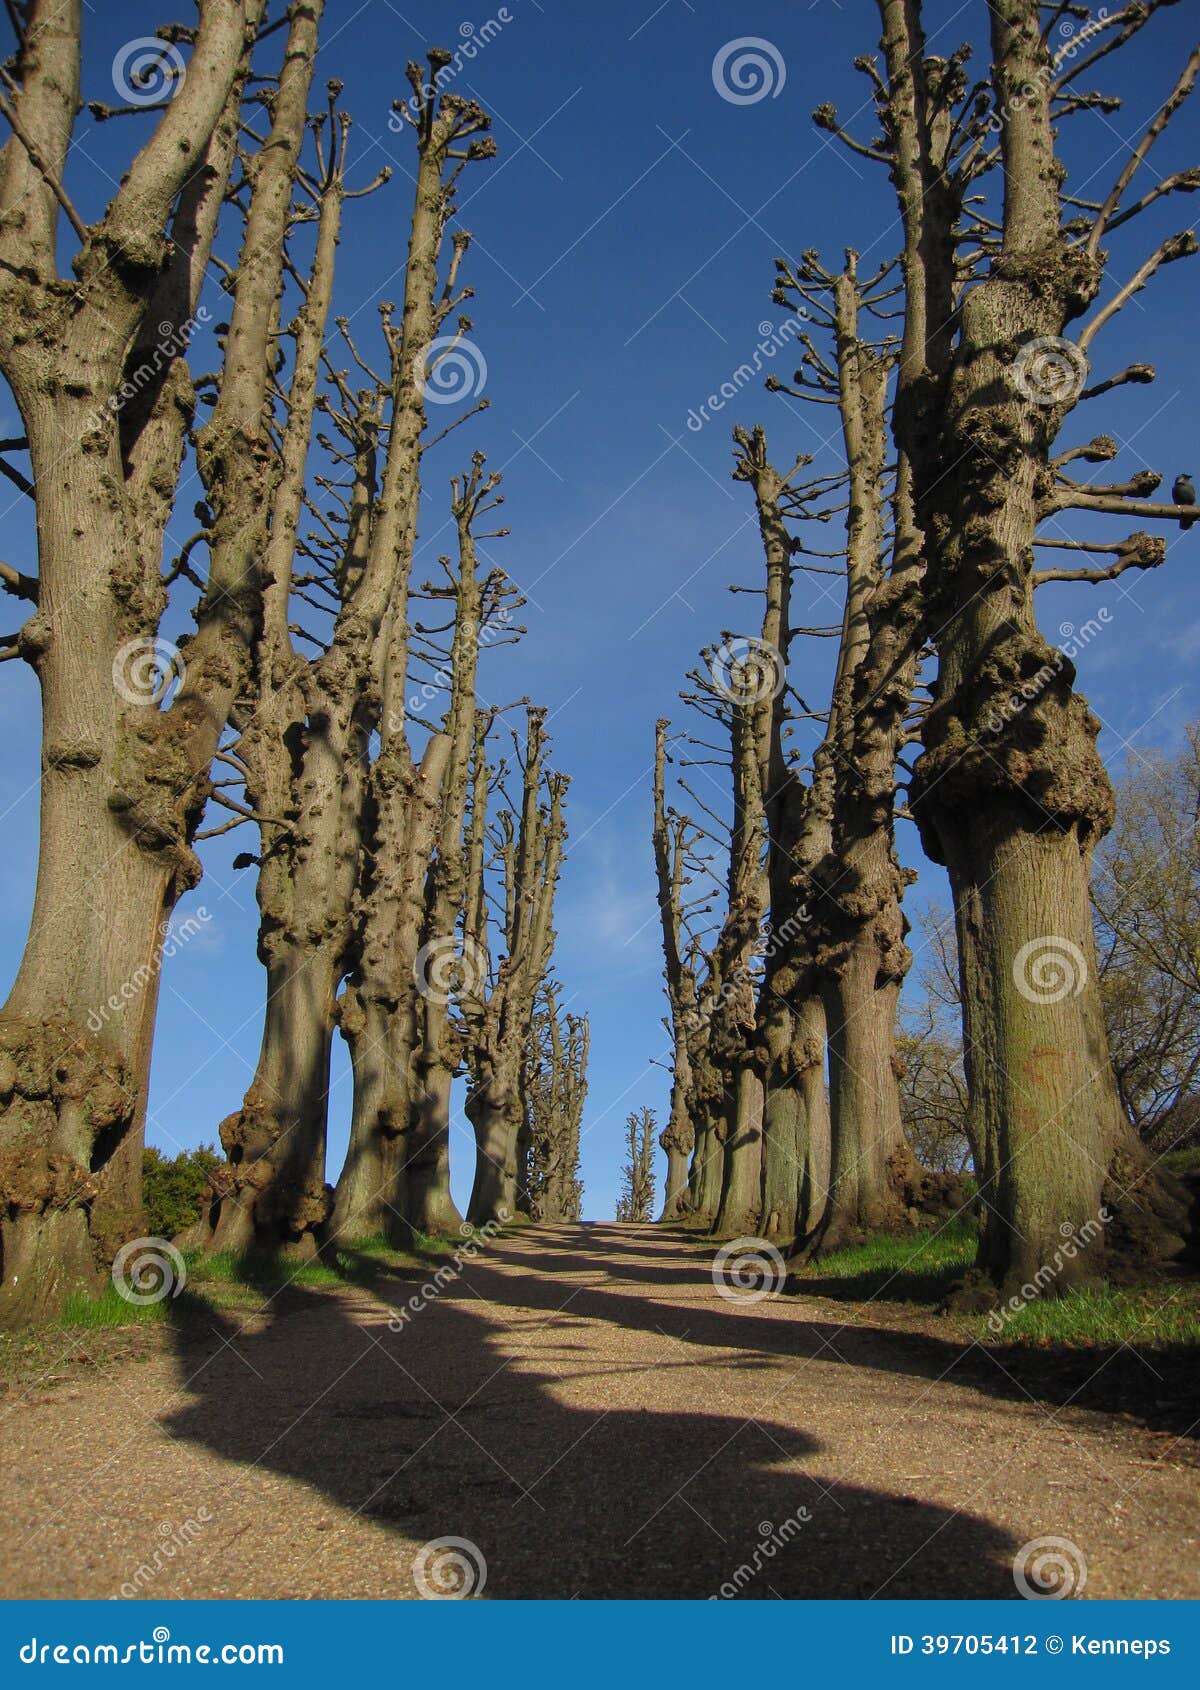 Pollarded trees in an tree-lined avenue